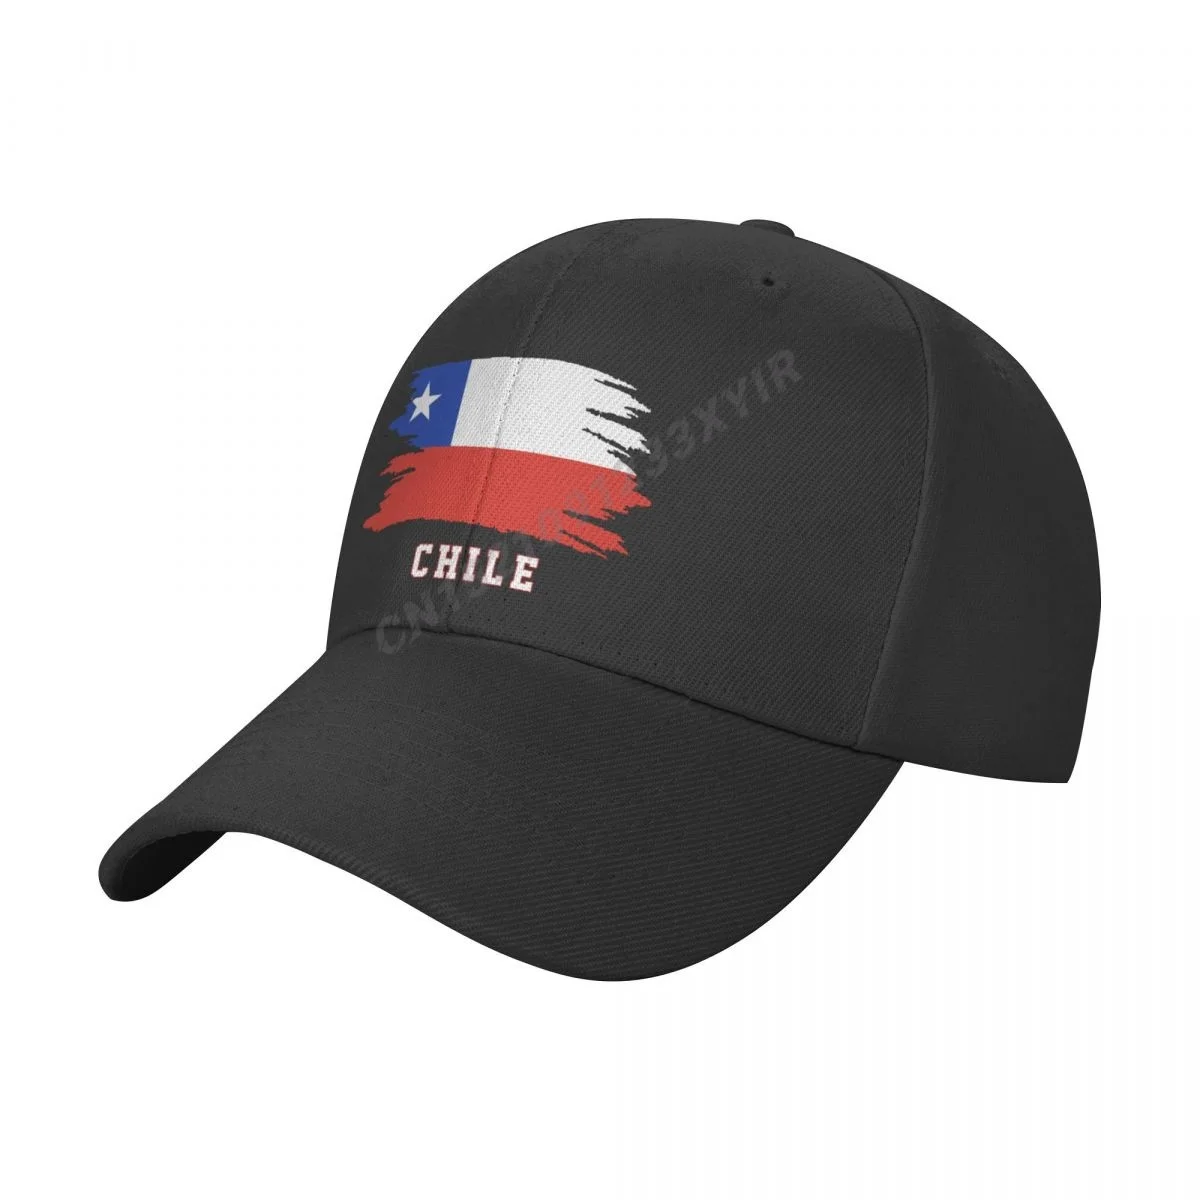 

Baseball Cap Chile Flag Cool Chilean Fans Wild Sun Shade Peaked Adjustable Outdoor Caps for Men Women